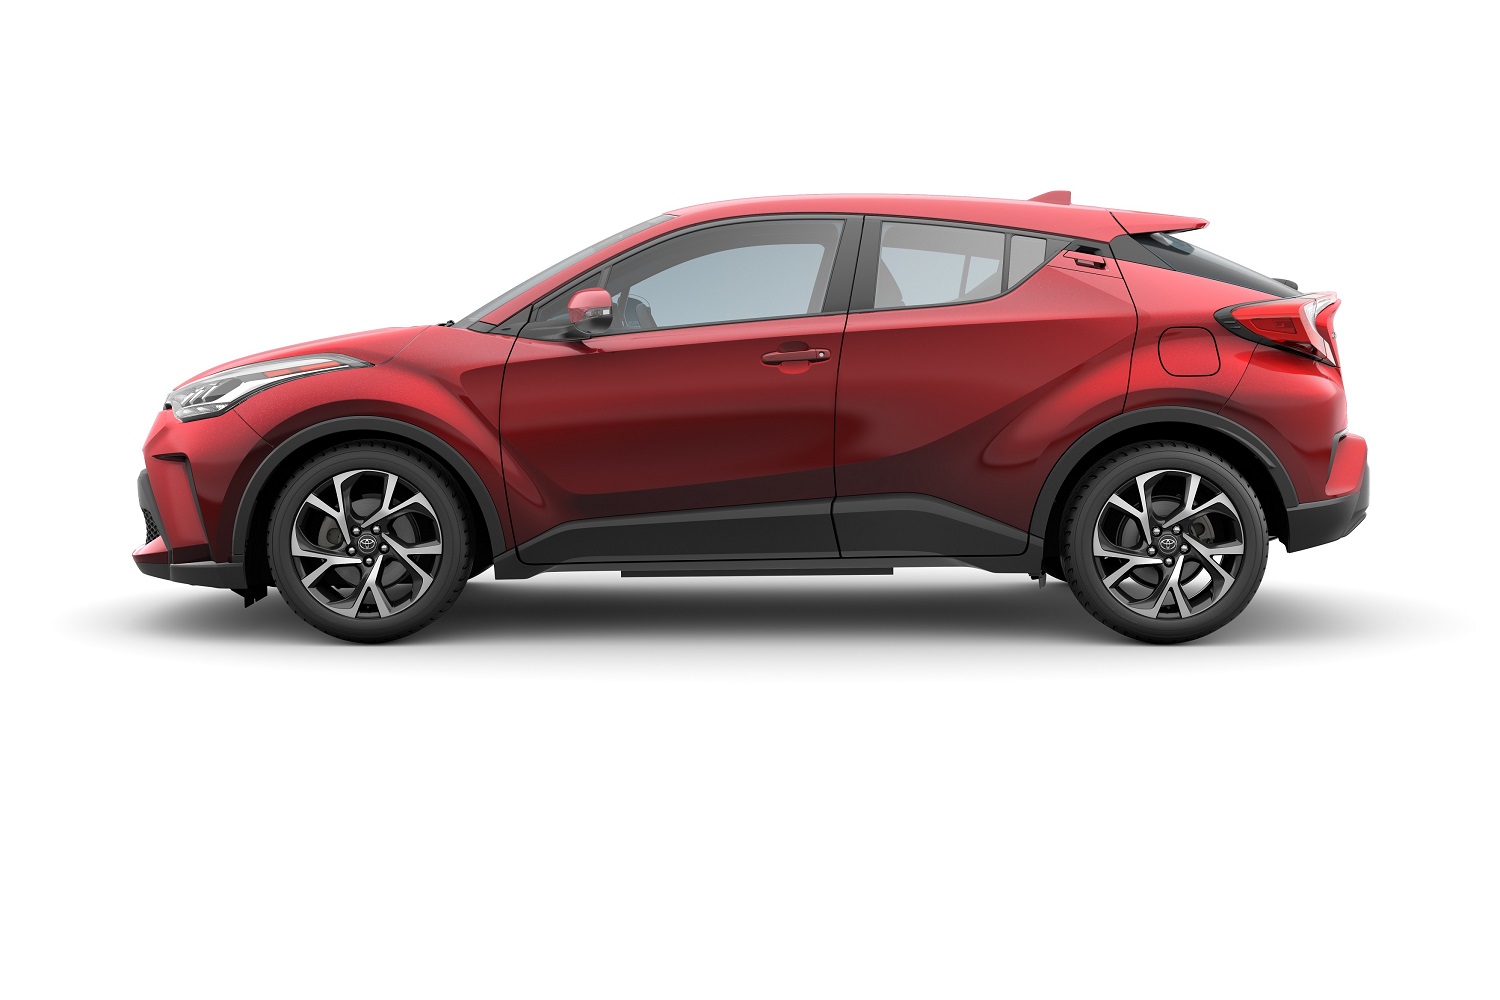 2020 toyota c hr crossover gets standard android auto compatibility chr 01